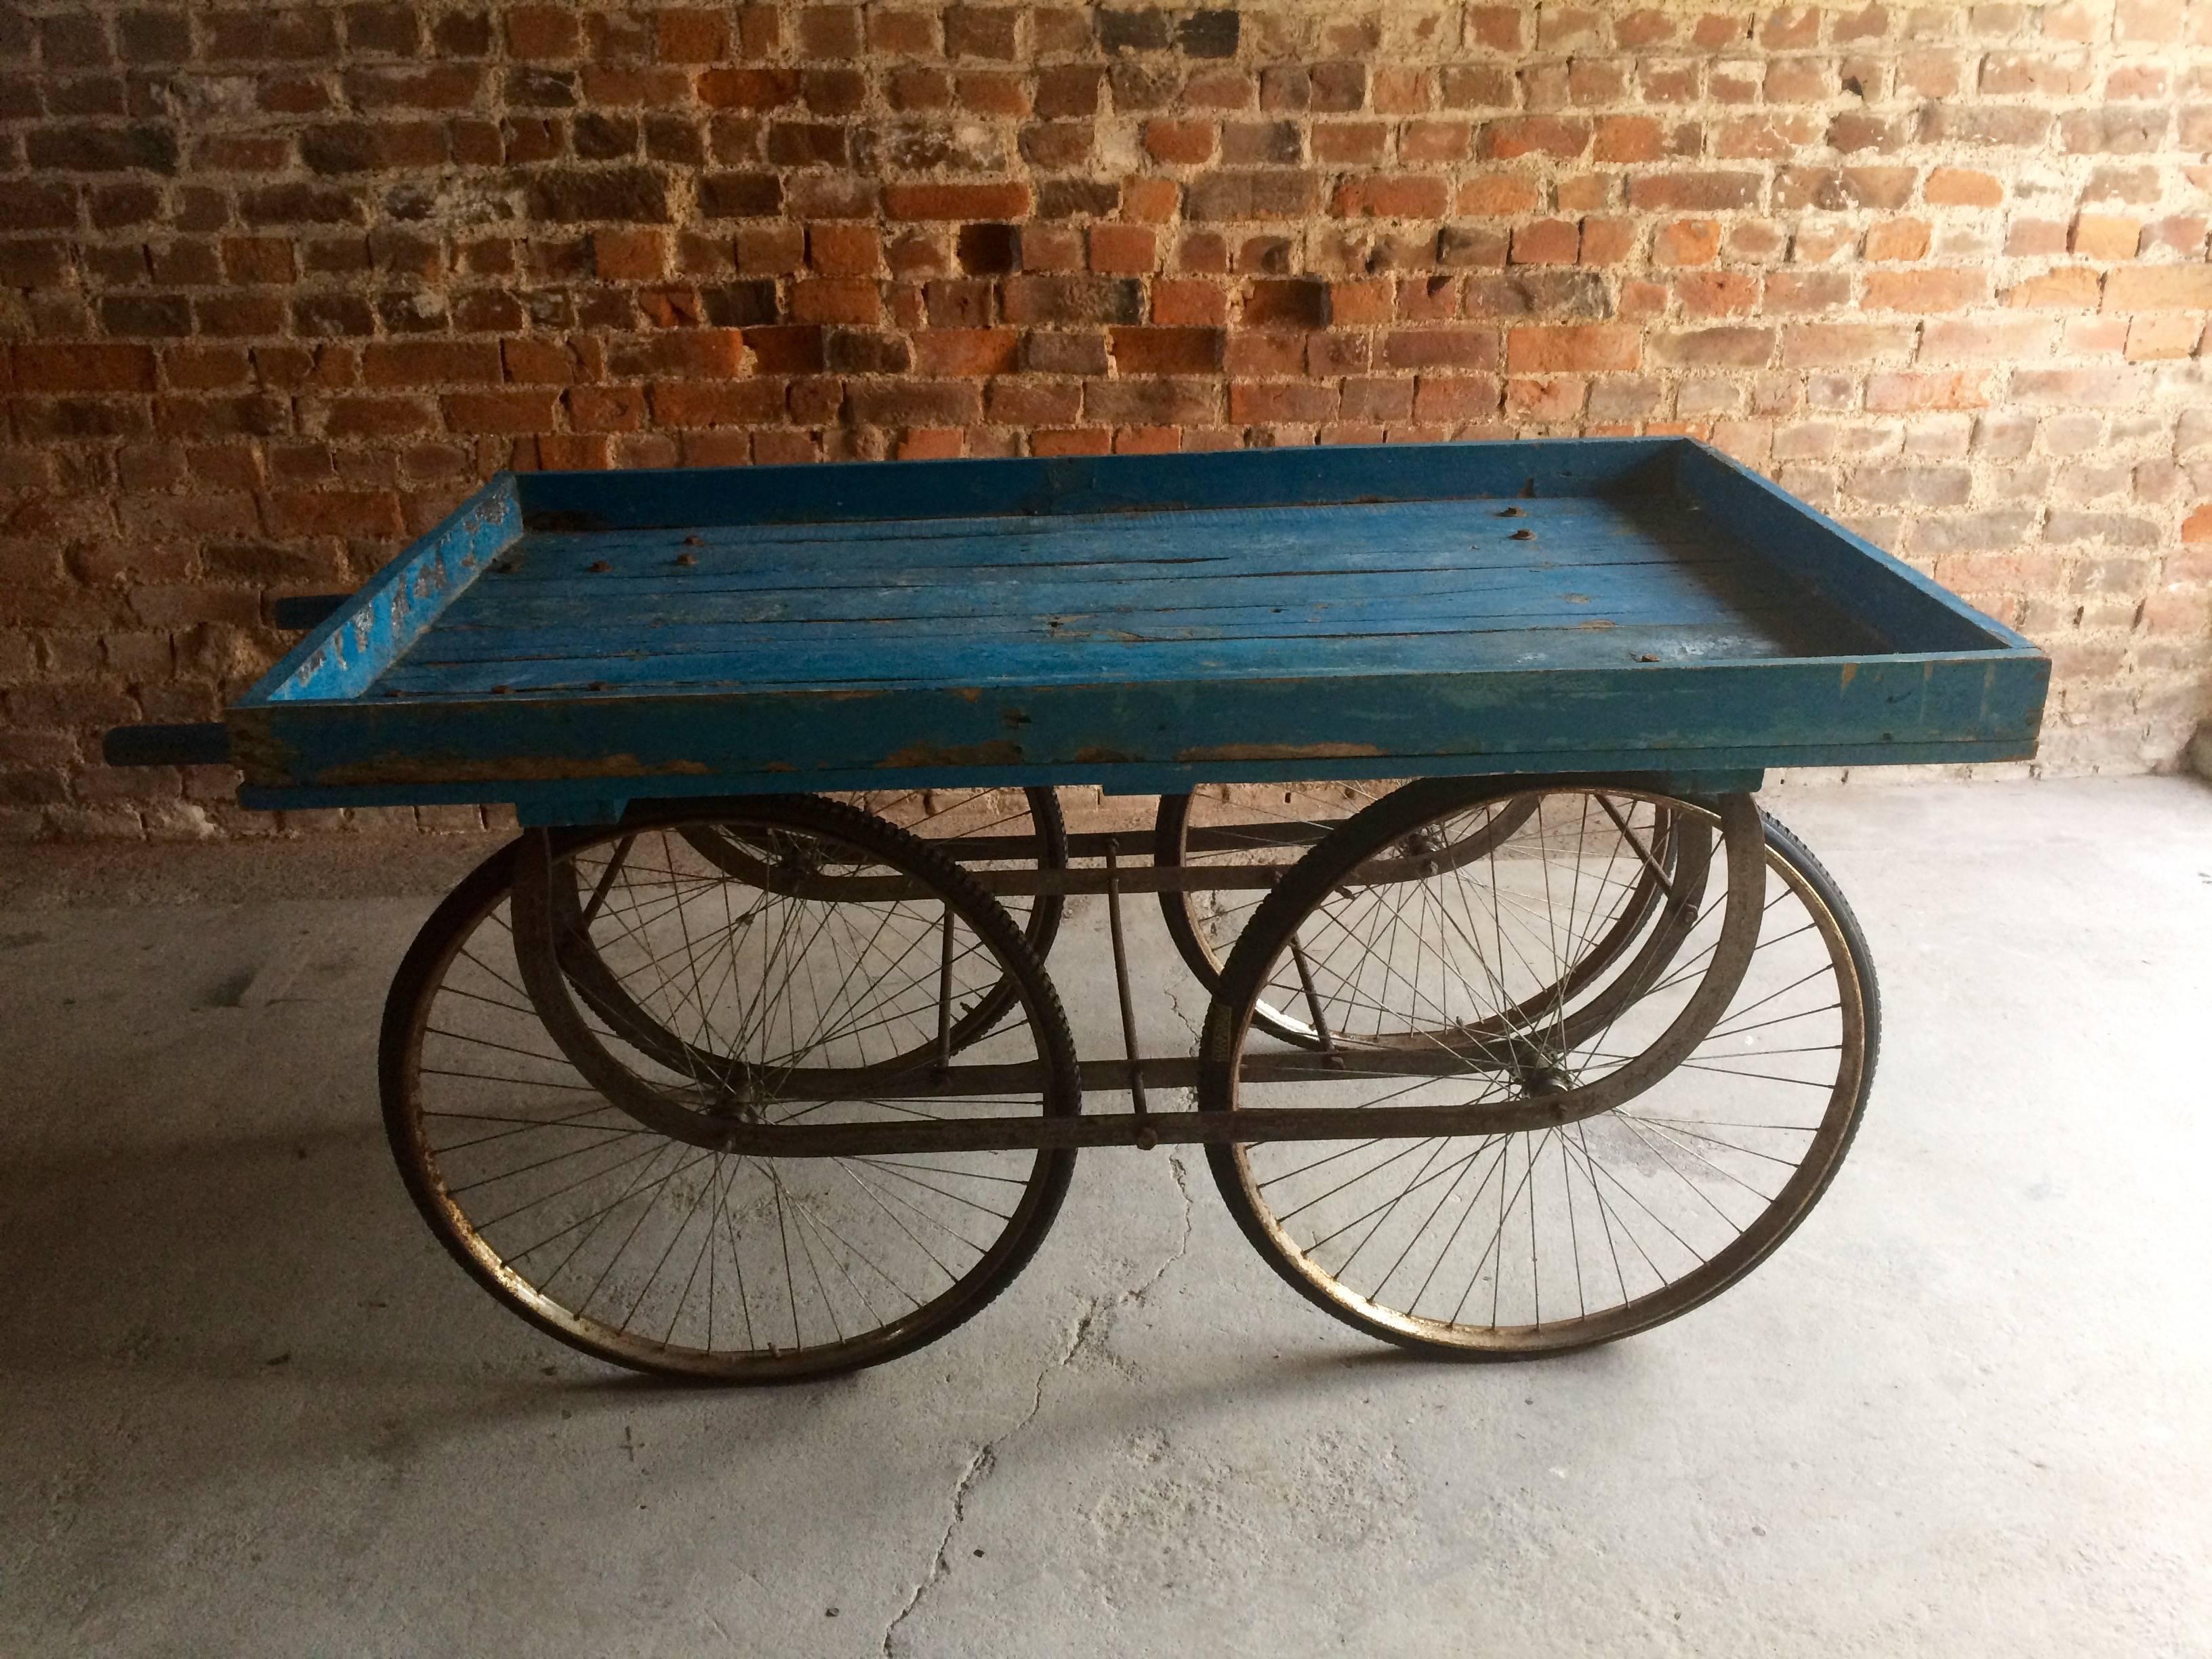 20th century Indian market cart

Description:

A stunningly beautiful antique 19th century Indian market hand cart, large bed over tall suspension frame with four bicycle tires, two short handles to push, the cart is finished in a deep blue which